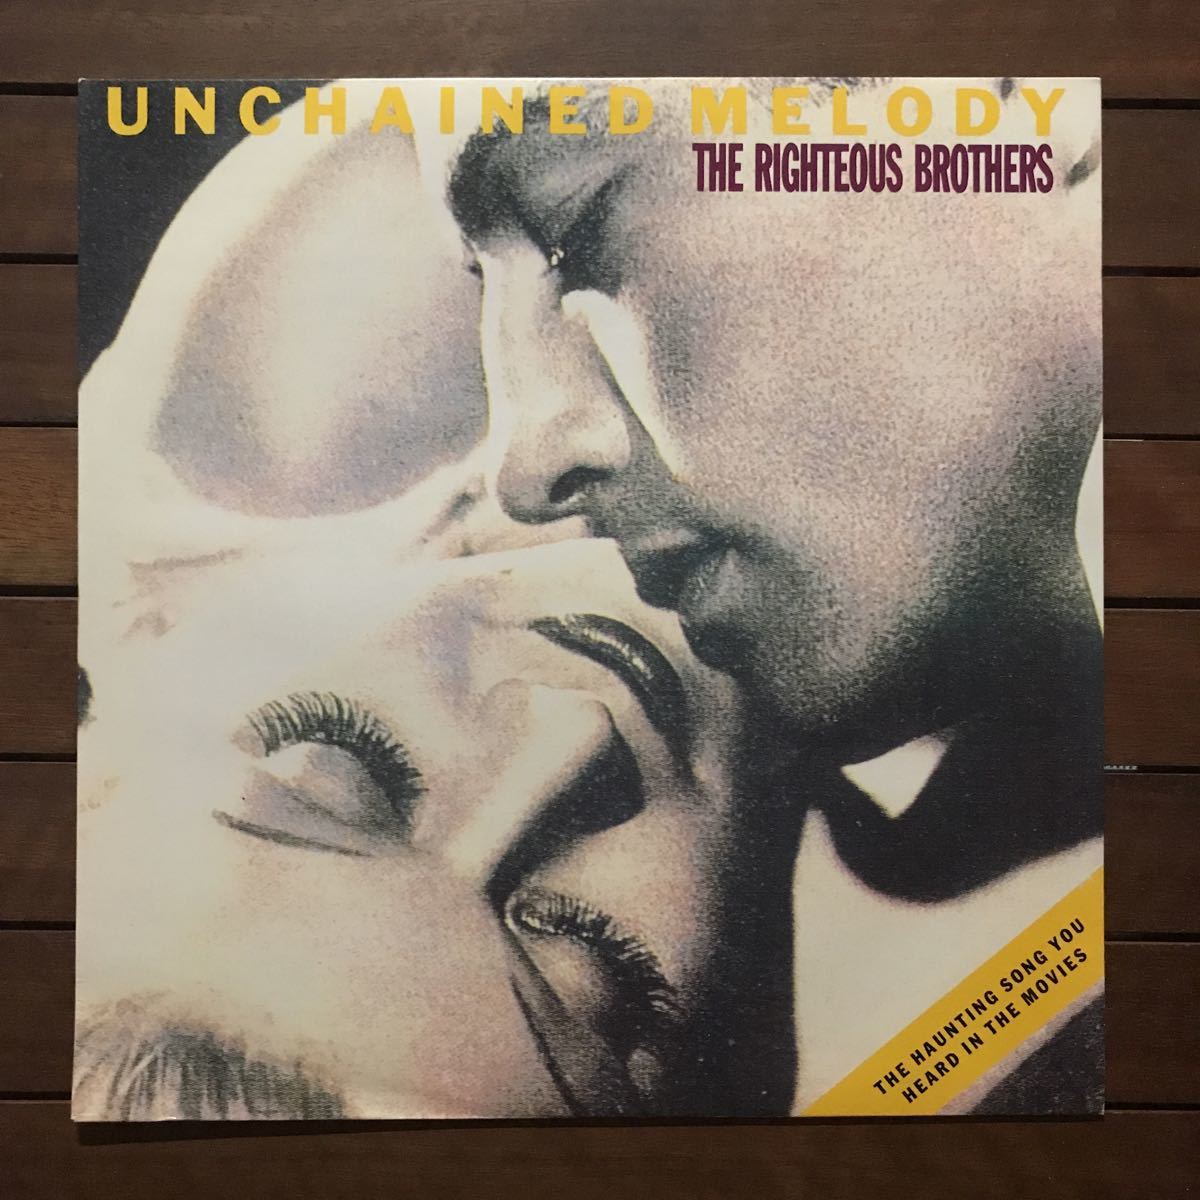 【r&b】The Righteous Brothers / Unchained Melody［12inch］オリジナル盤《R67 9595》